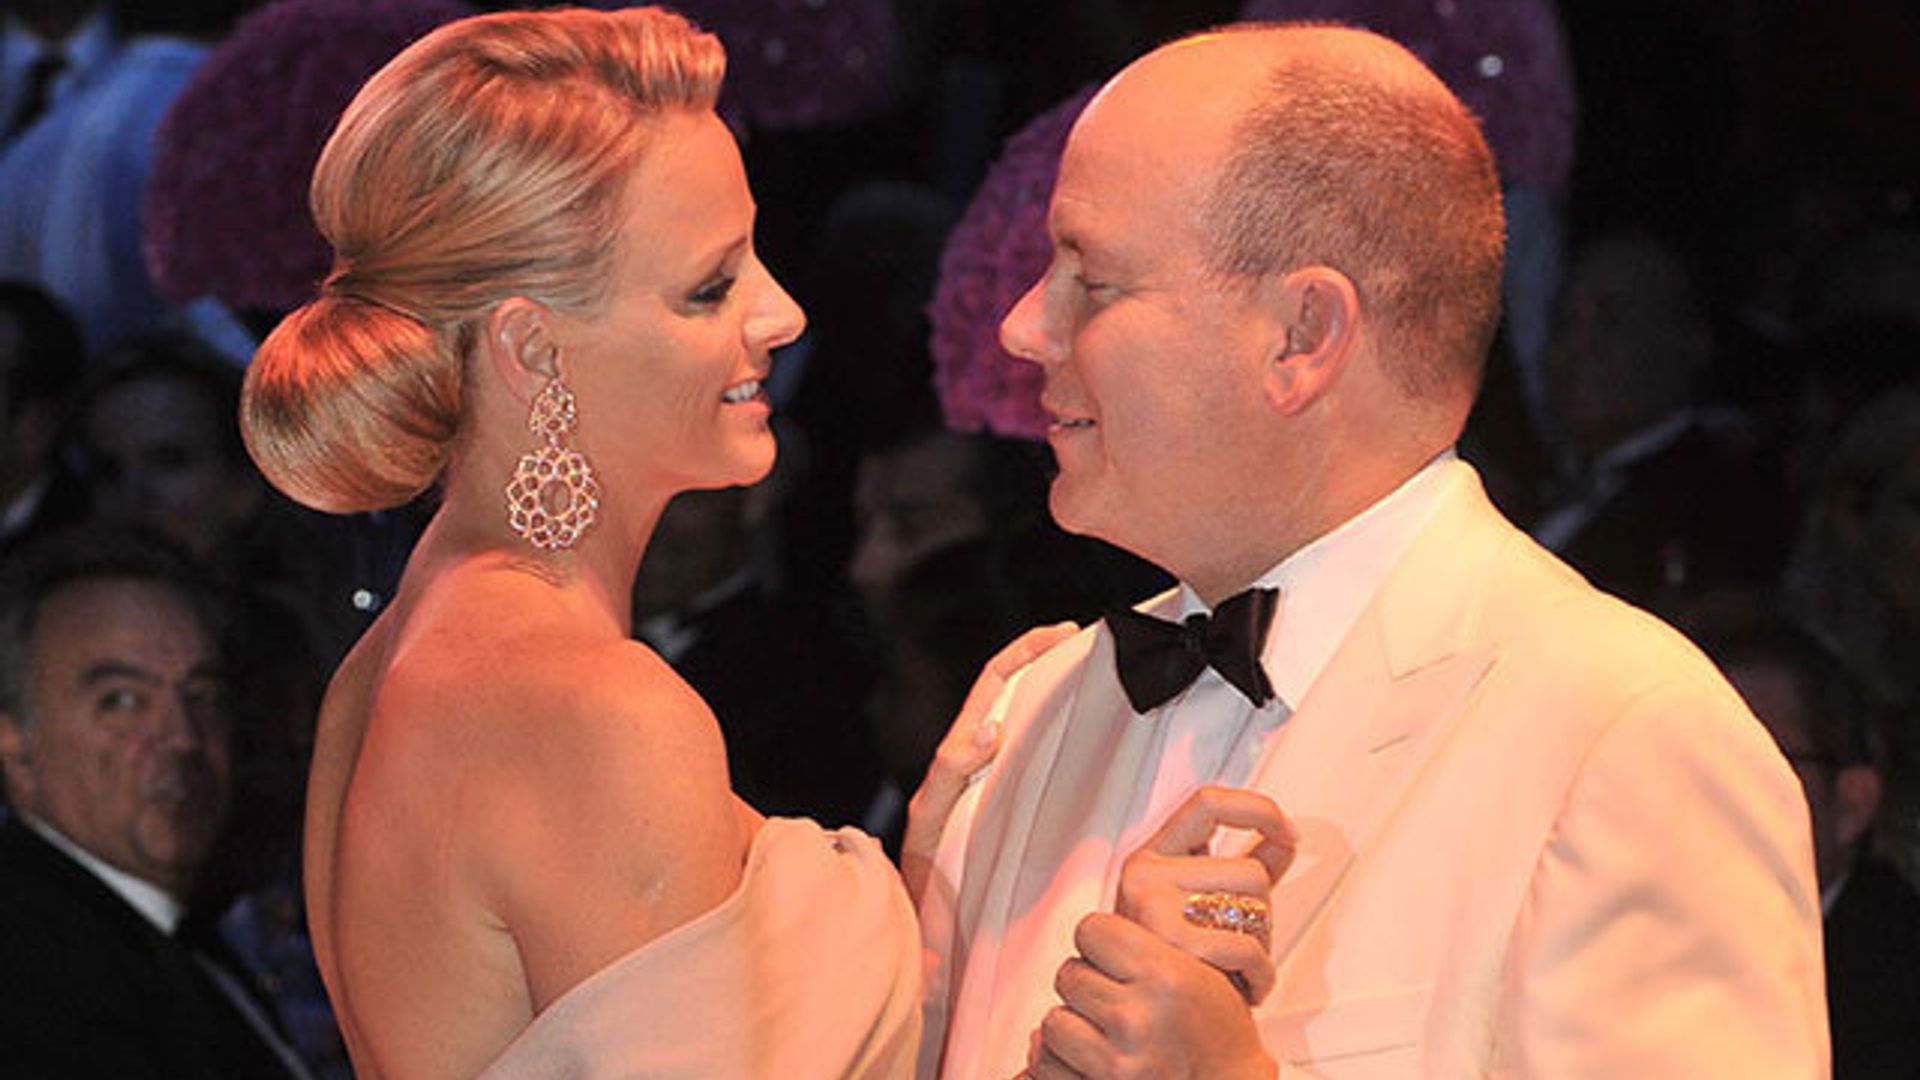 Princess Charlene and Prince Albert’s most tender moments in photos